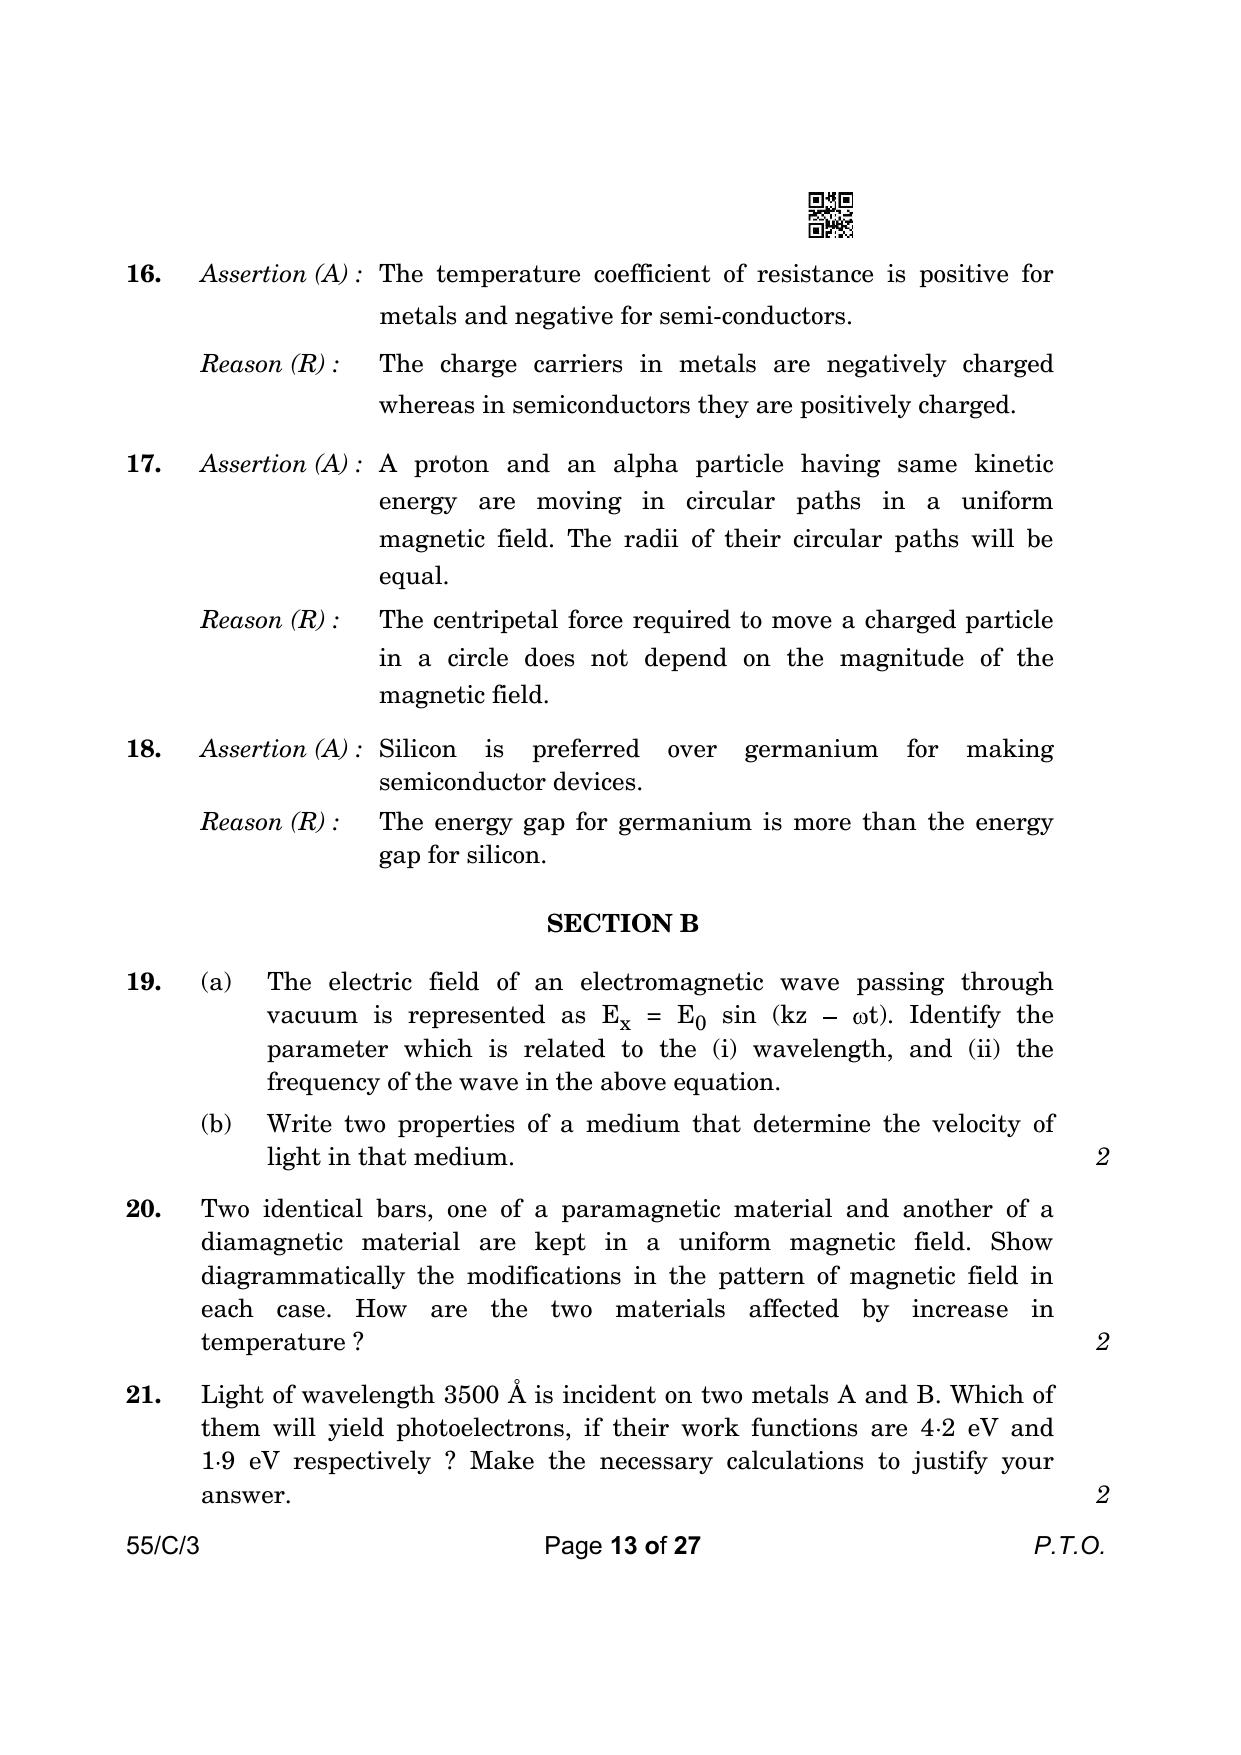 CBSE Class 12 55-3 Physics 2023 (Compartment) Question Paper - Page 13